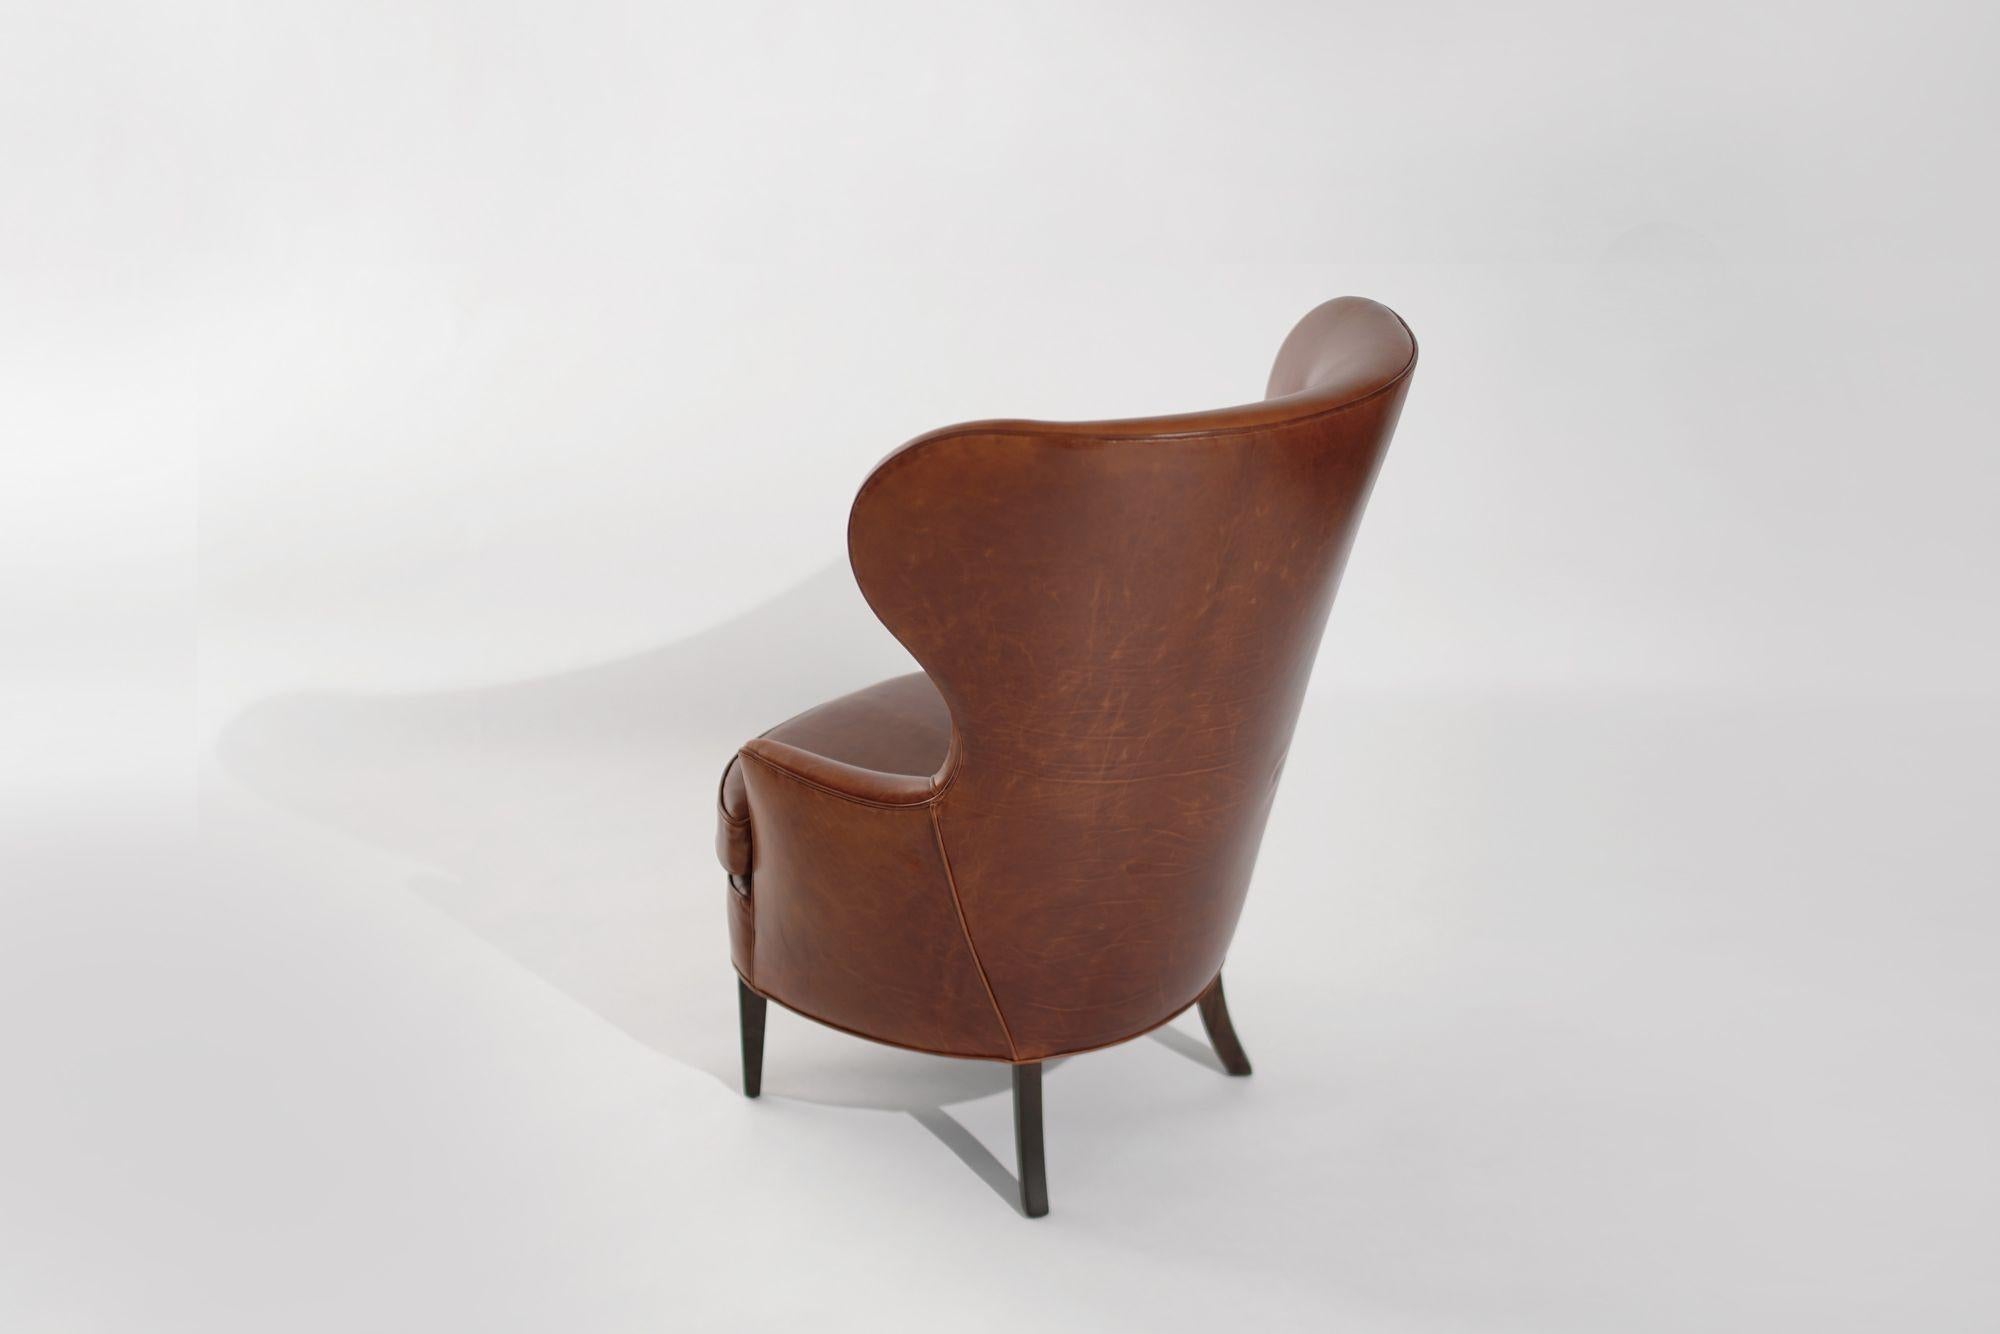 20th Century Vintage Wingback Chair in Cognac Leather, C. 1950s For Sale